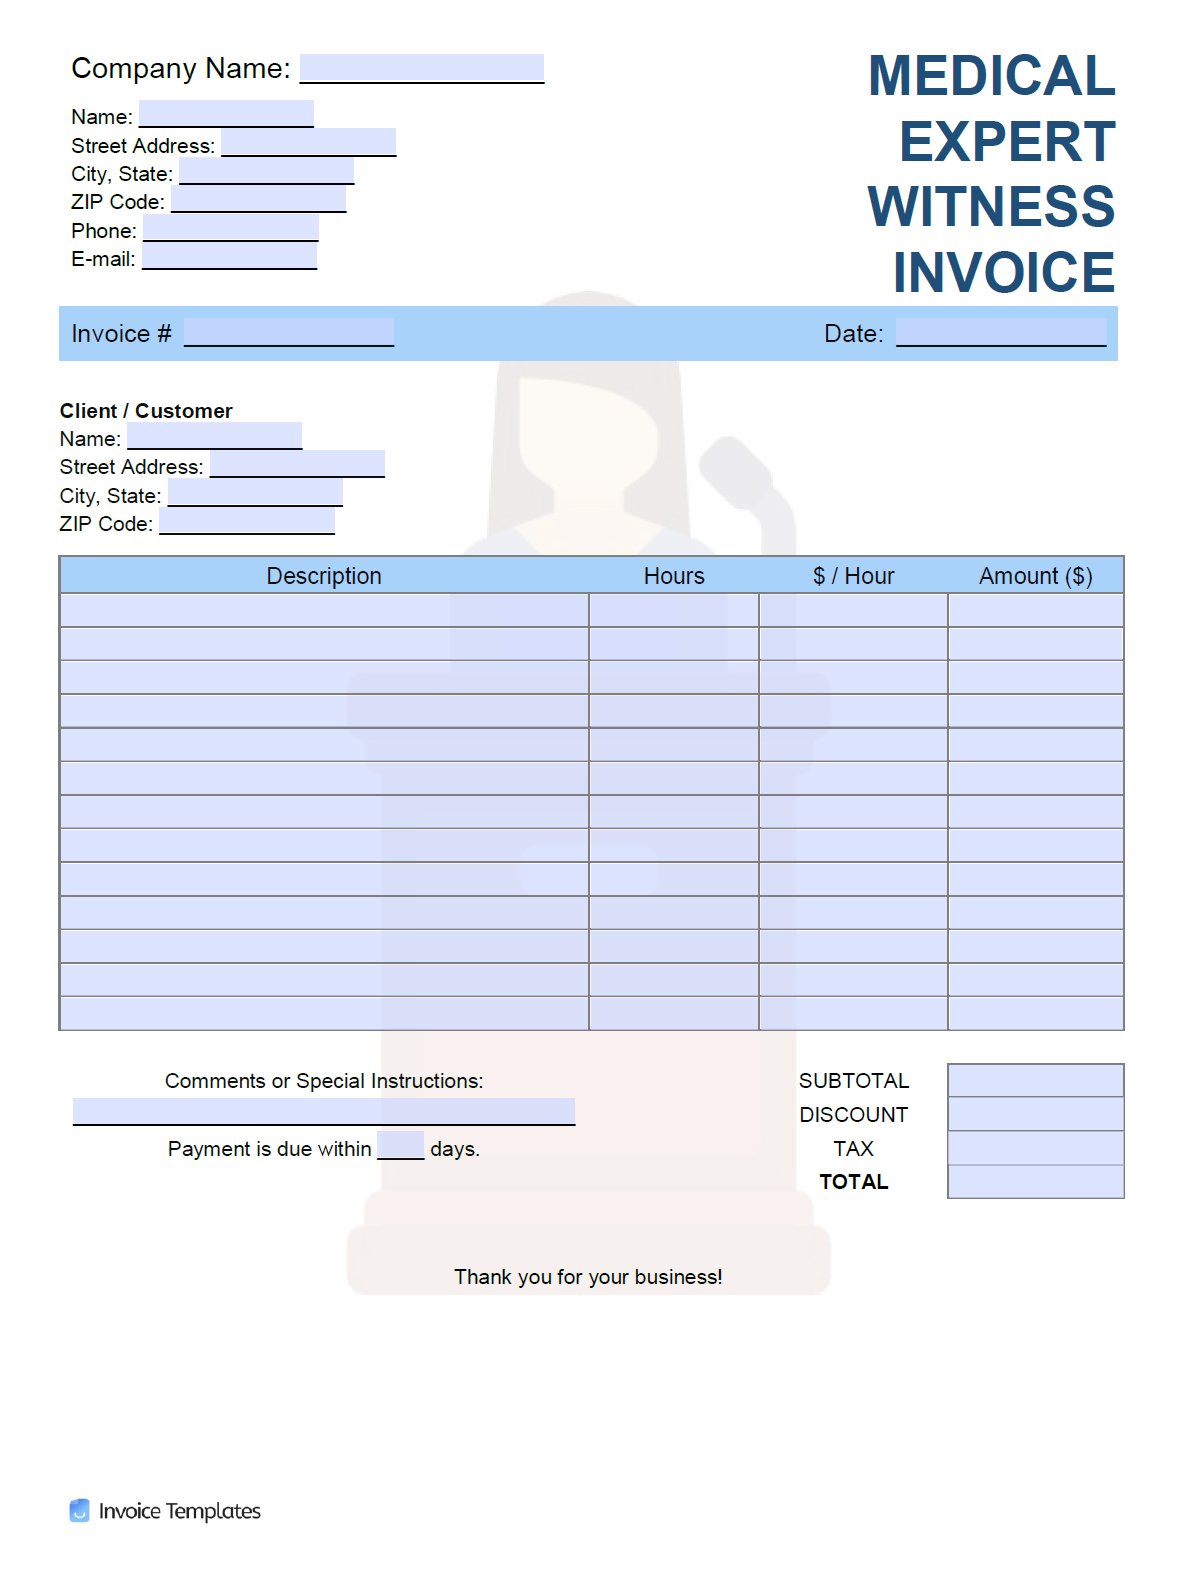 Free Medical Expert Witness Invoice Template  PDF  WORD  EXCEL With Regard To Expert Witness Report Template